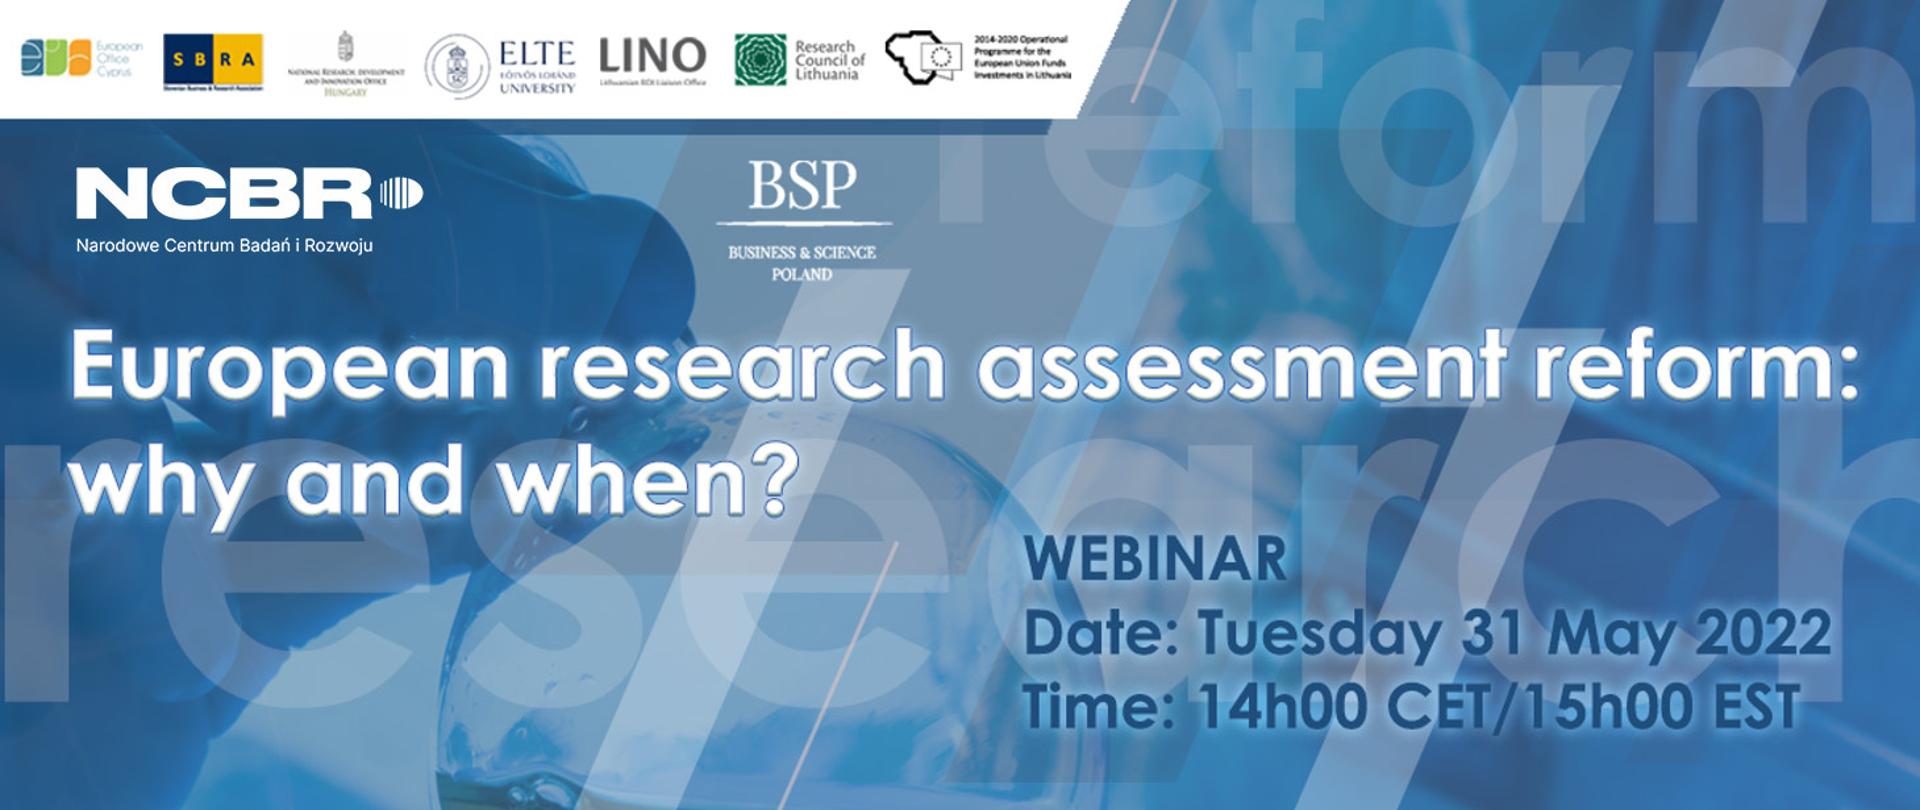 European research assessment reform: why and when? 